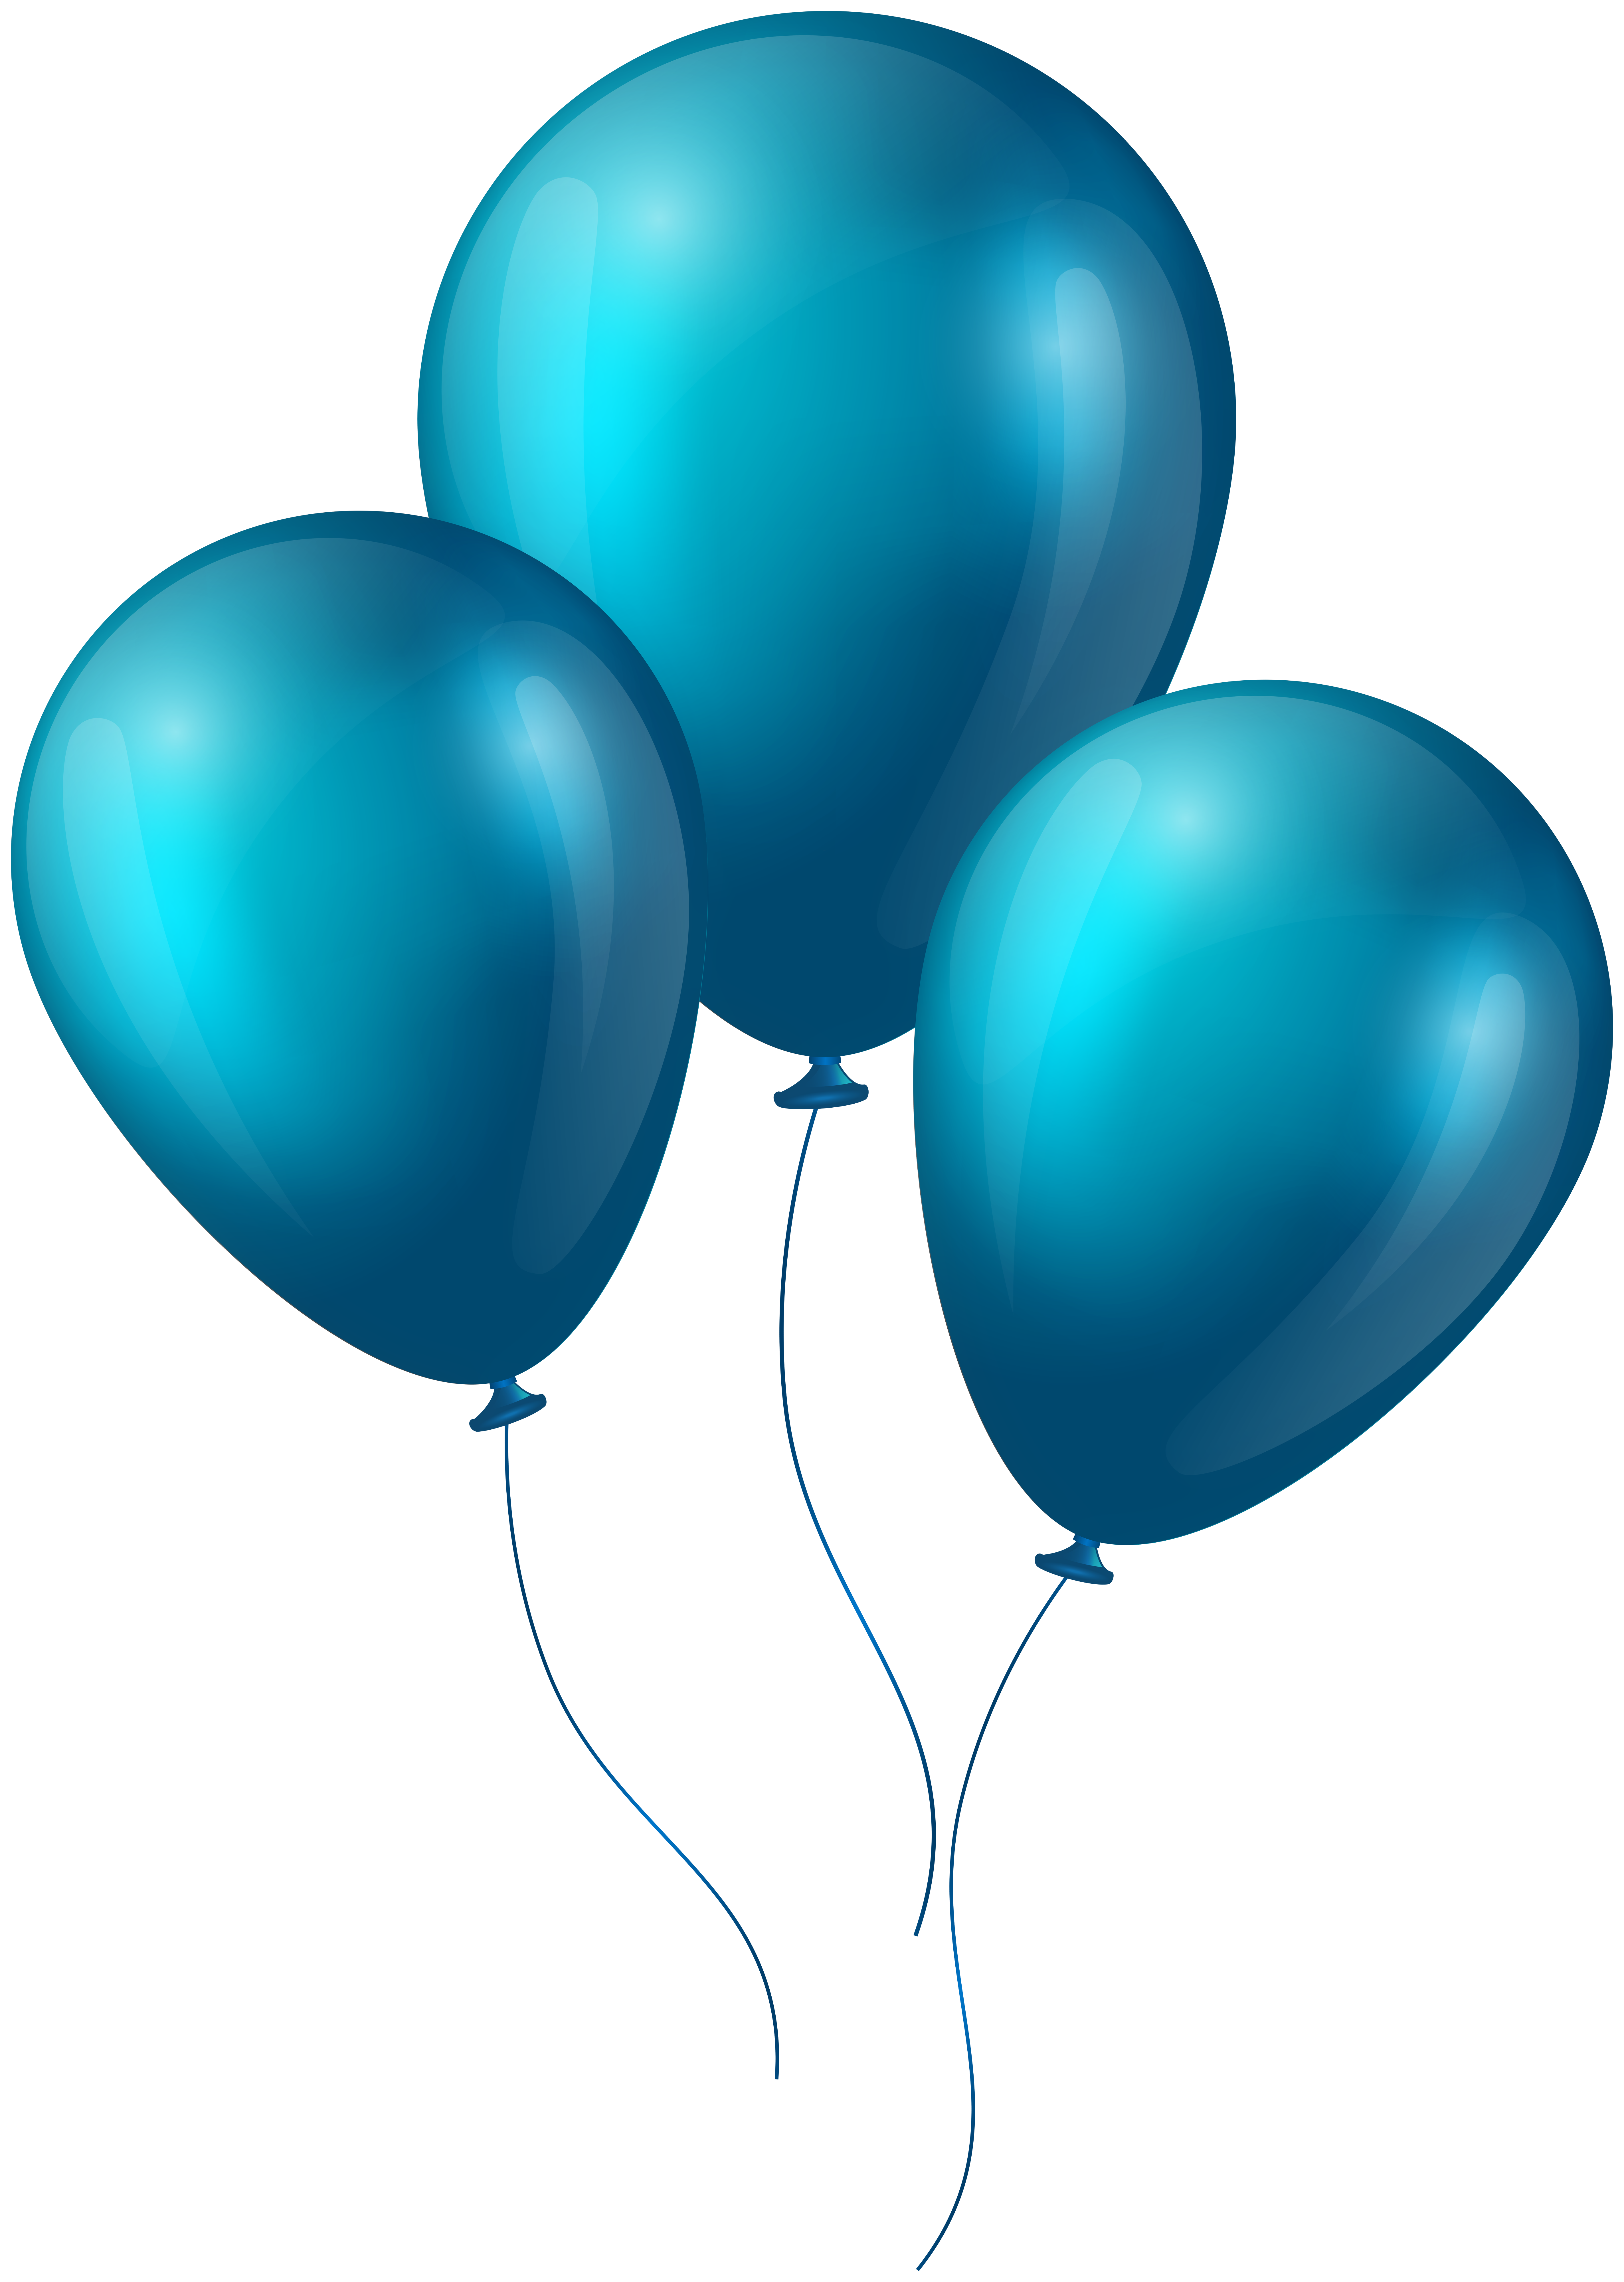 Result Images Of Globos Azules Png Sin Fondo Png Image Collection | The ...